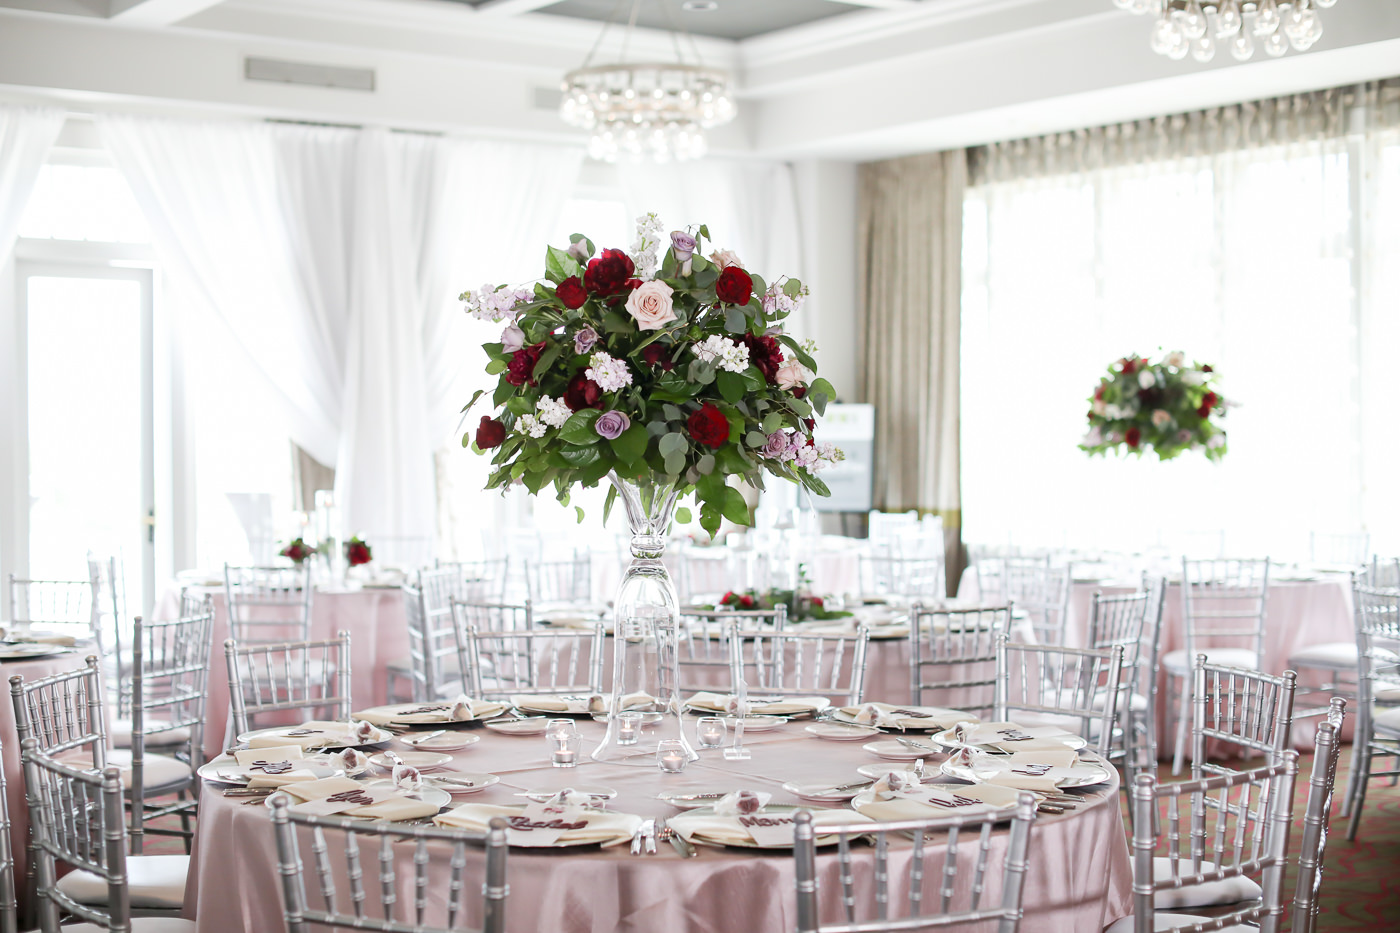 Romantic Wedding Reception Decor, Round Tables with Dusty Rose Silk Linen, Silver Chiavari Chairs, Tall Glass Vase with Blush Pink, Wine Red Roses, Eucalyptus and Greenery Floral Centerpiece | Wedding Photographer Lifelong Photography Studios | Tampa Bay Wedding Planner Blue Skies Weddings and Events | St. Petersburg Hotel Wedding Venue The Birchwood | Over the Top Rental Linens